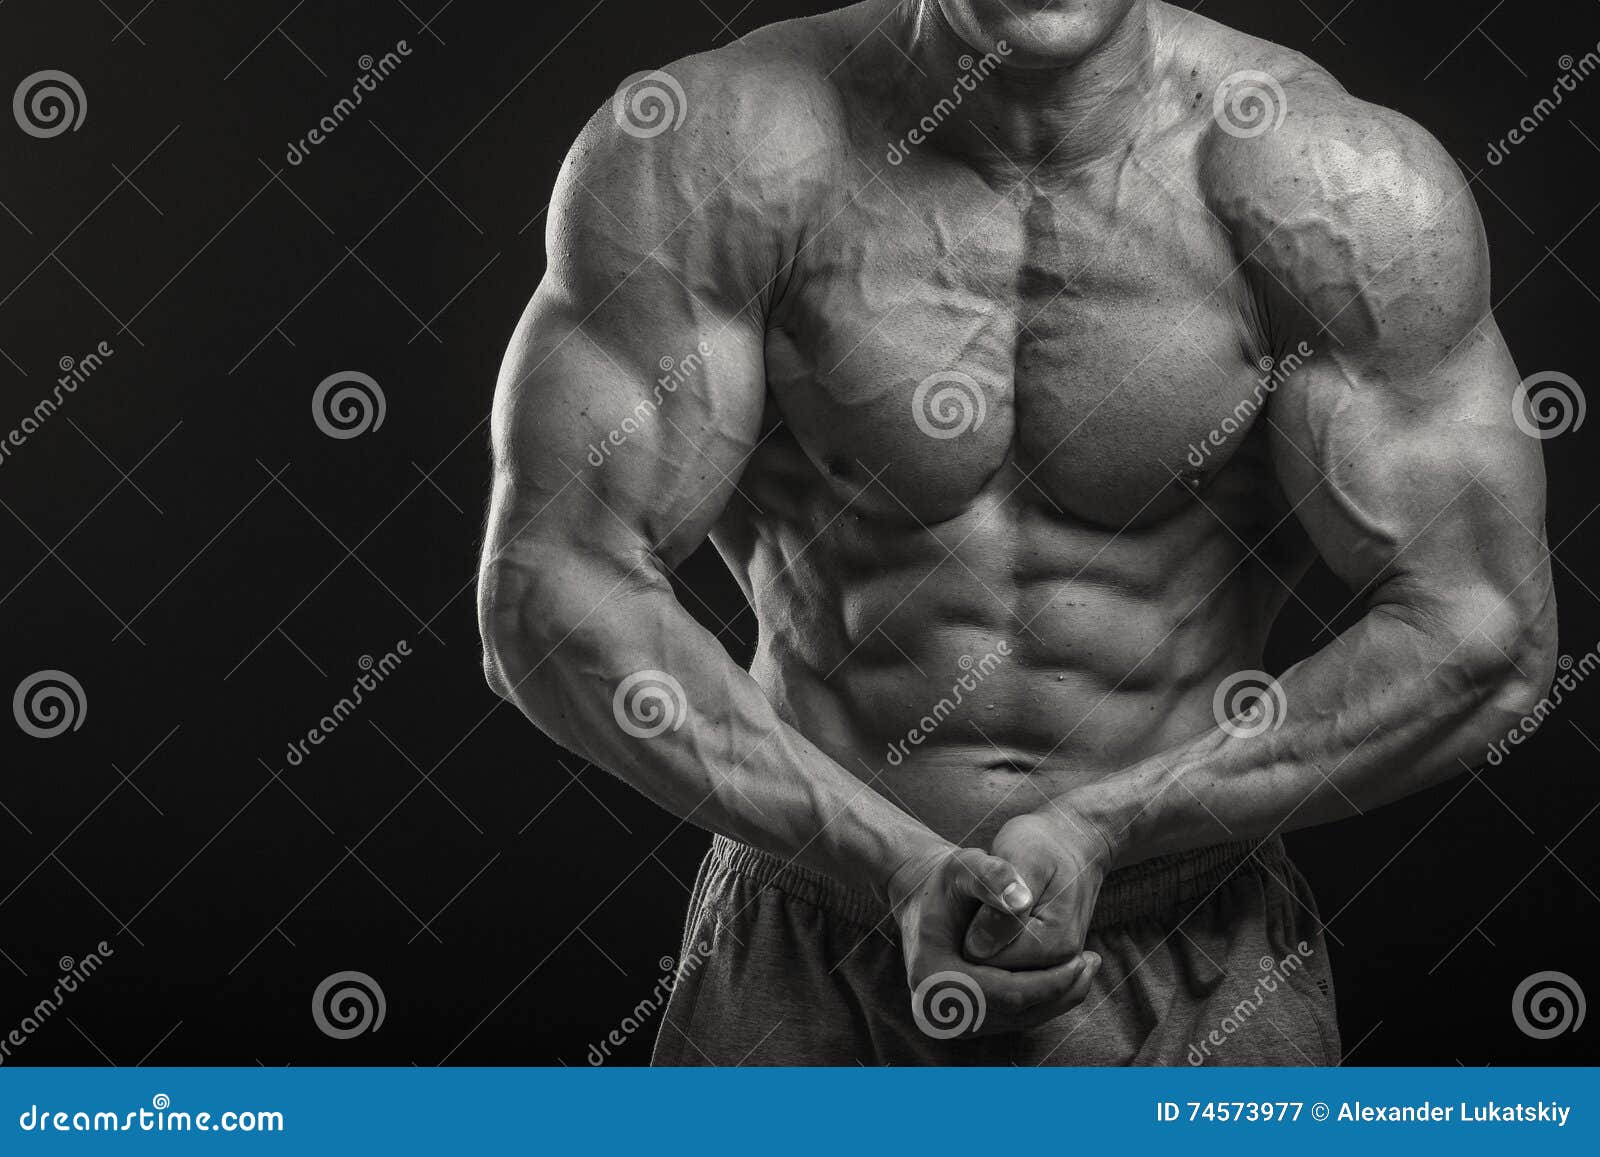 A Professional Athlete on a Dark Background Stock Image - Image of copy ...